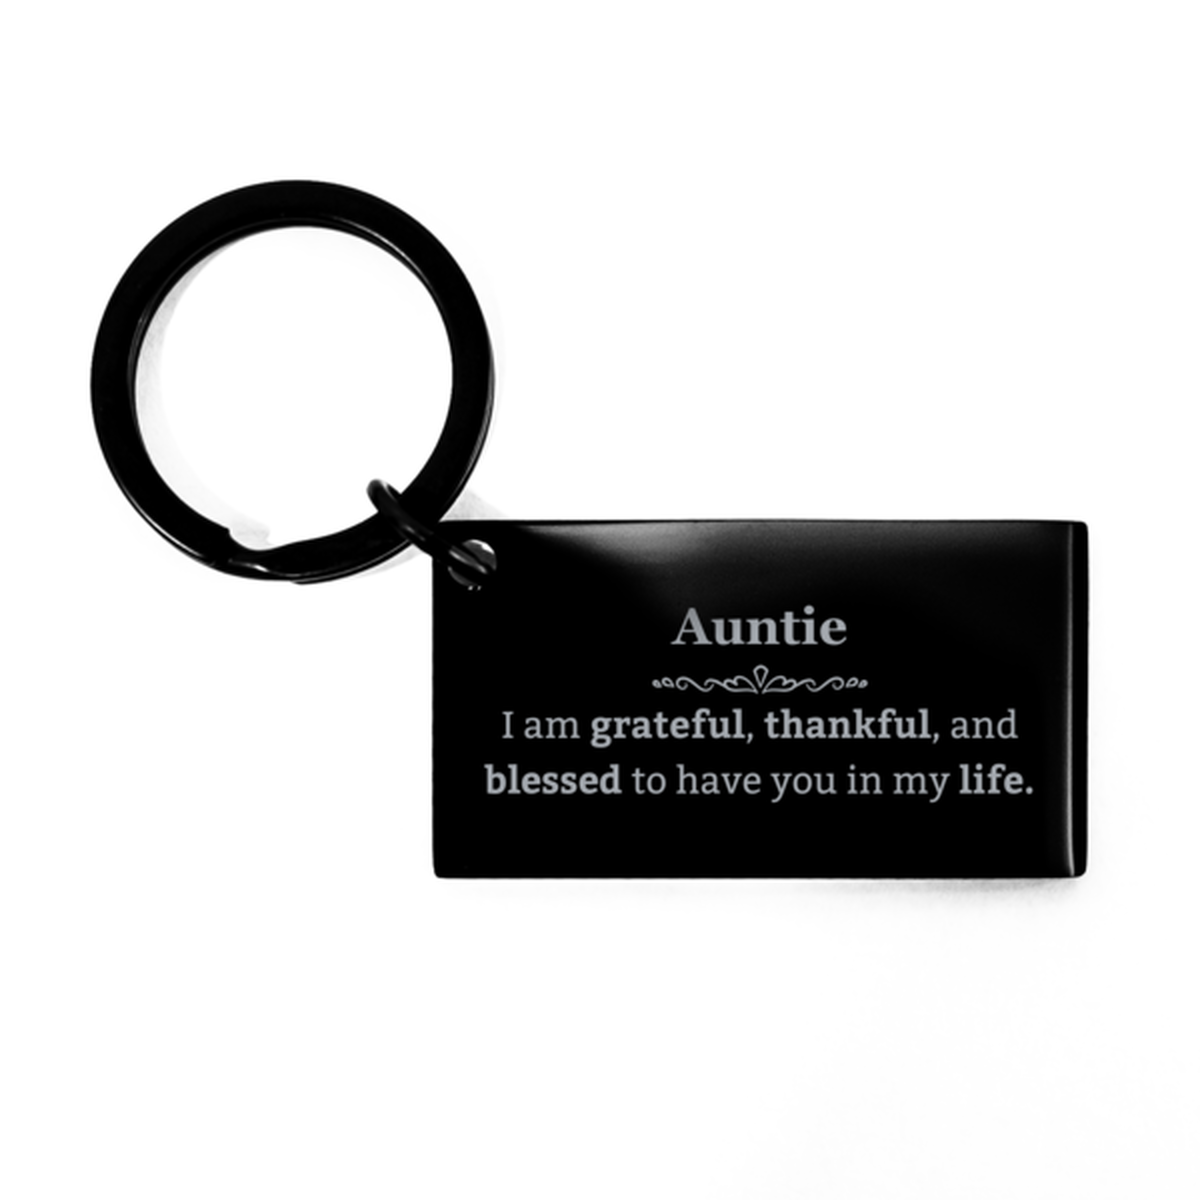 Auntie Appreciation Gifts, I am grateful, thankful, and blessed, Thank You Keychain for Auntie, Birthday Inspiration Gifts for Auntie